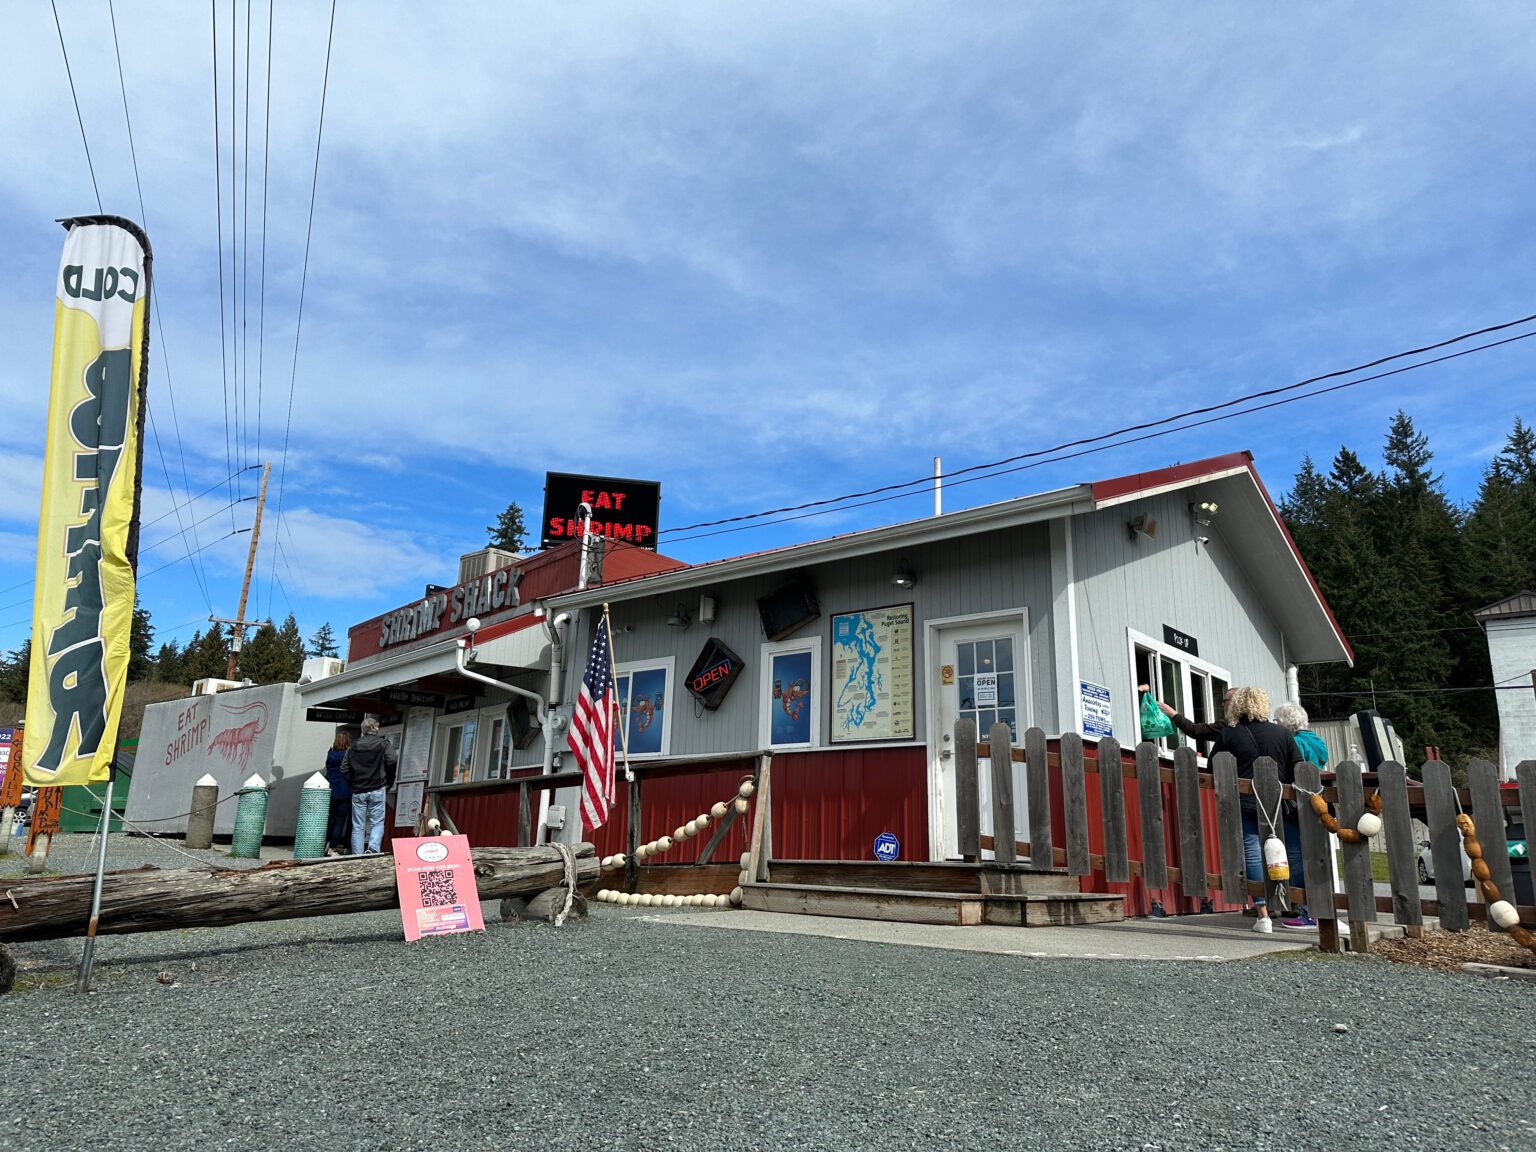 The Shrimp Shack is located on Highway 20 south of Anacortes and east of Deception Pass.